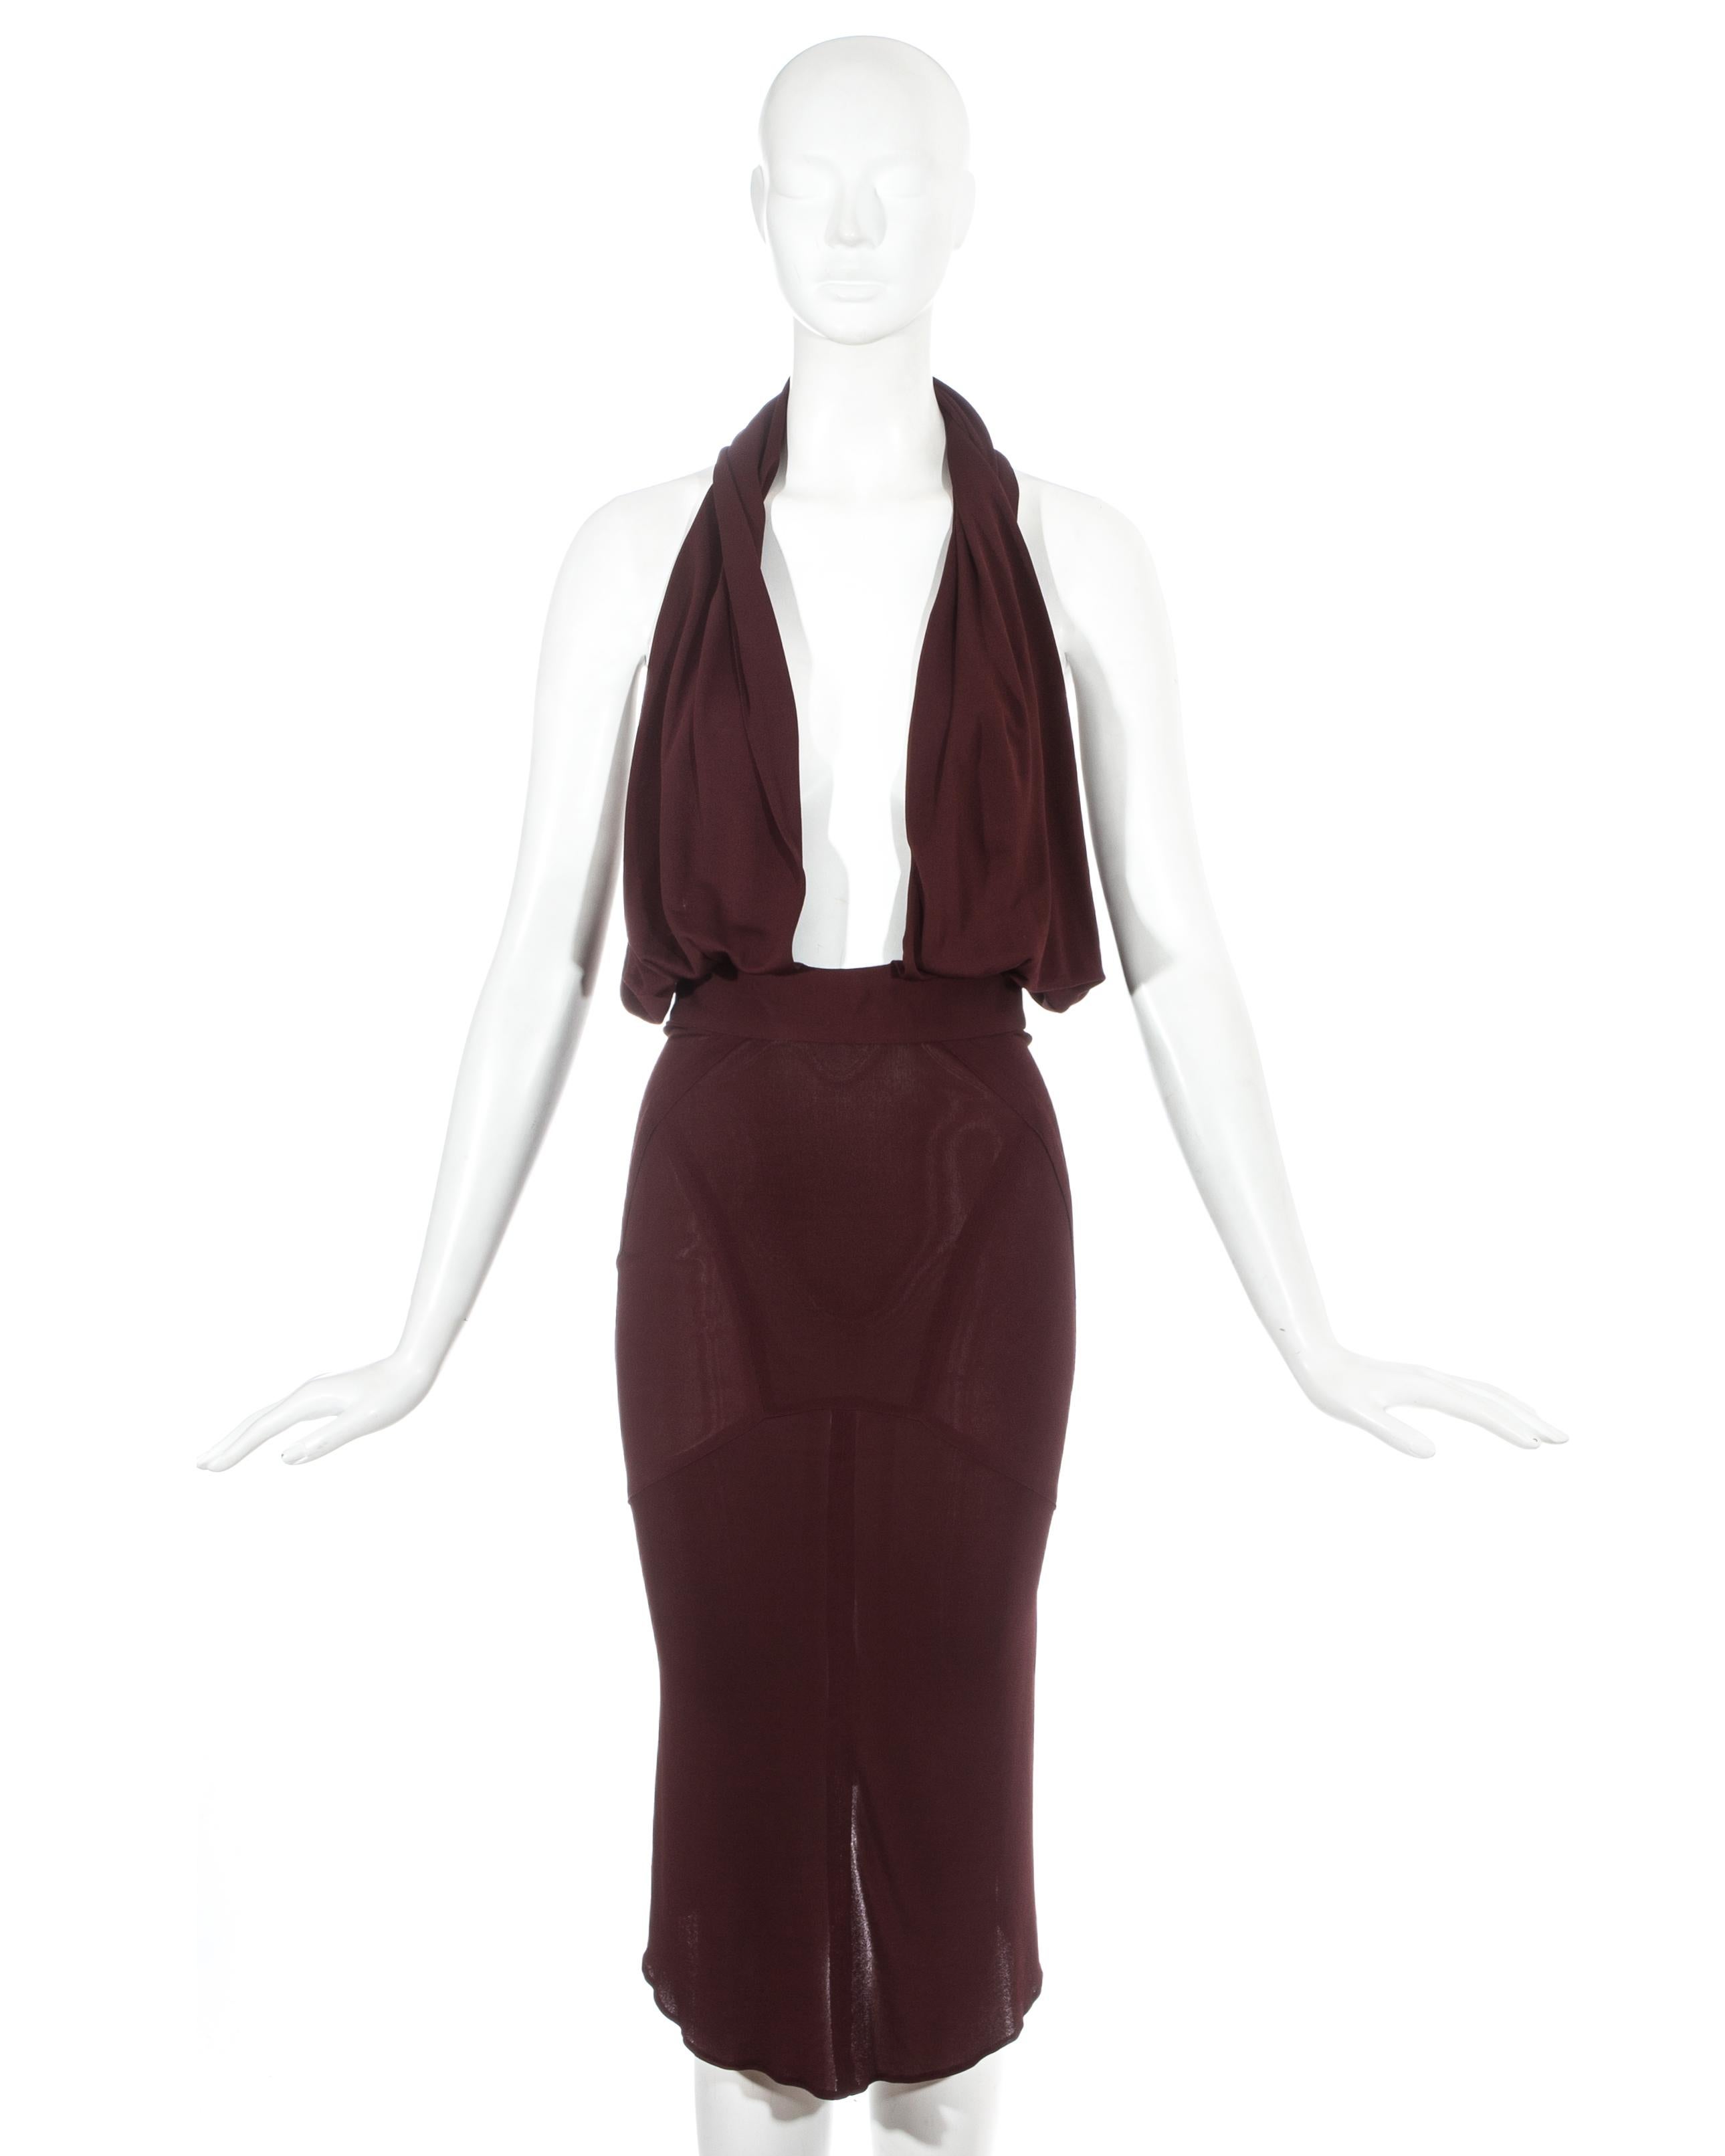 Azzedine Alaia red rayon jersey evening dress with fitted waist and pencil skirt. Attached low cut halter neck collar which could be worn as a hood. 

Spring-Summer 1984